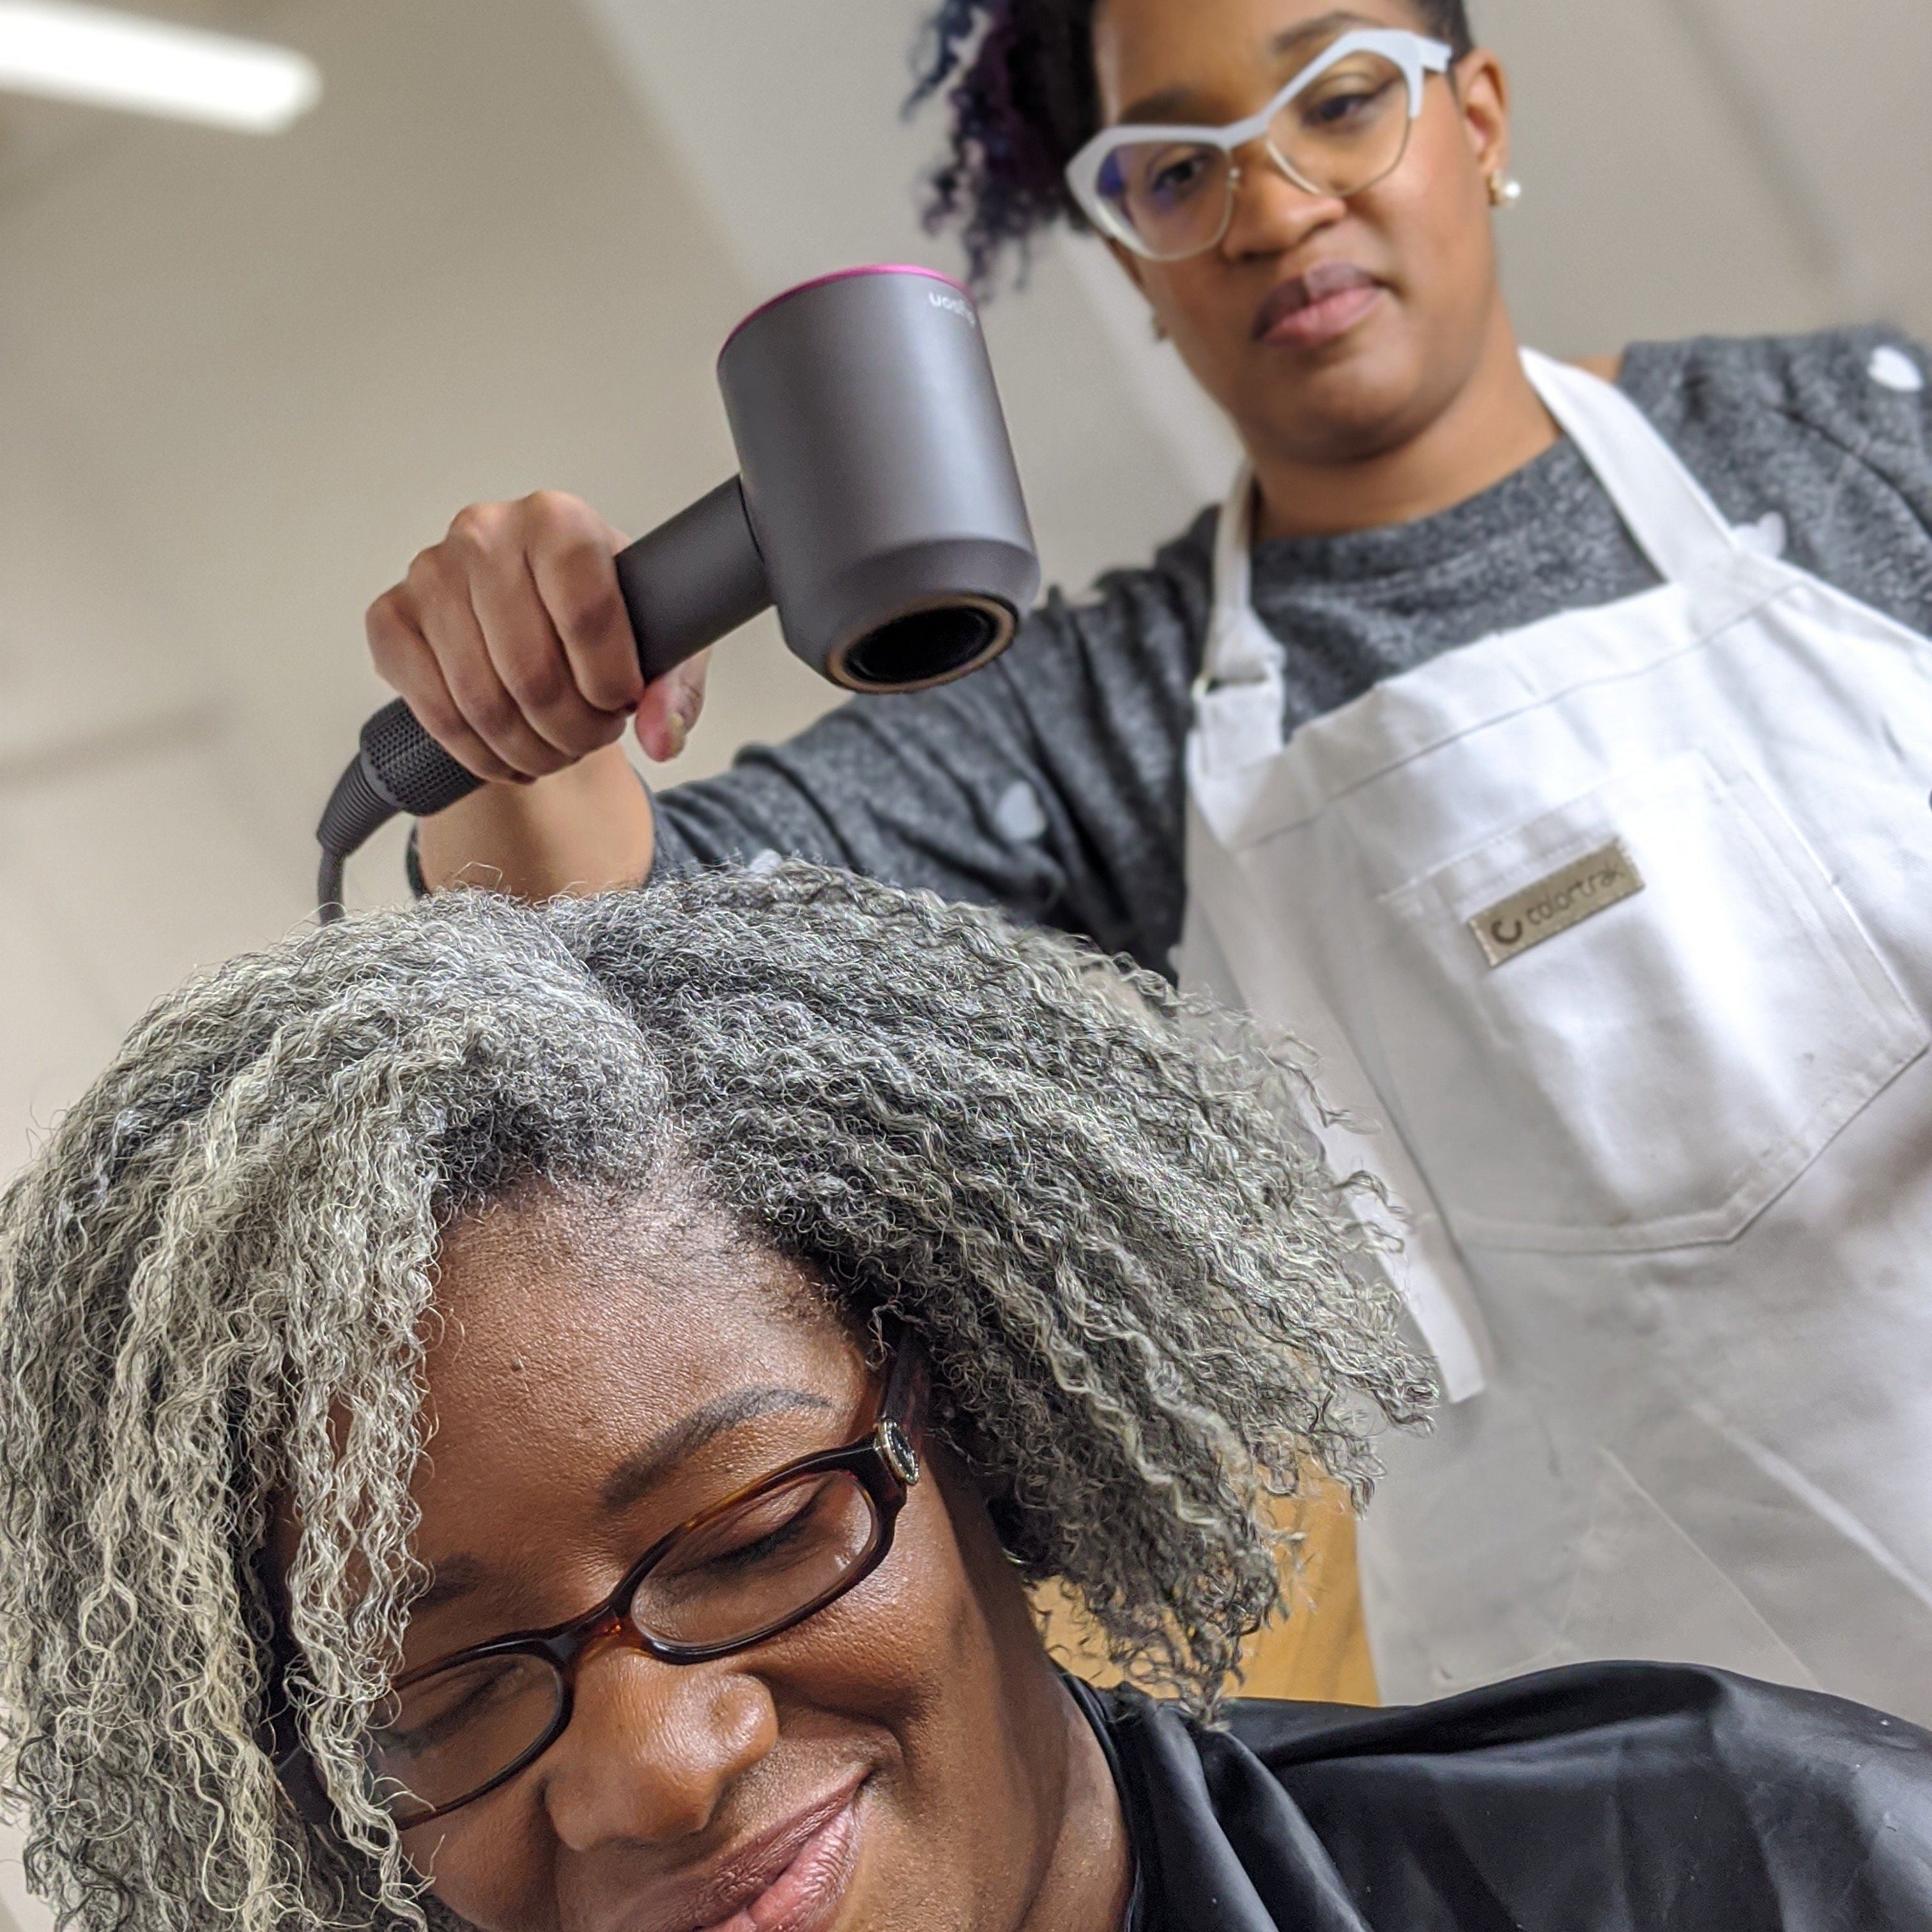 CurlMix Drying Natural Curly Hair with Dyson Hair Dryer